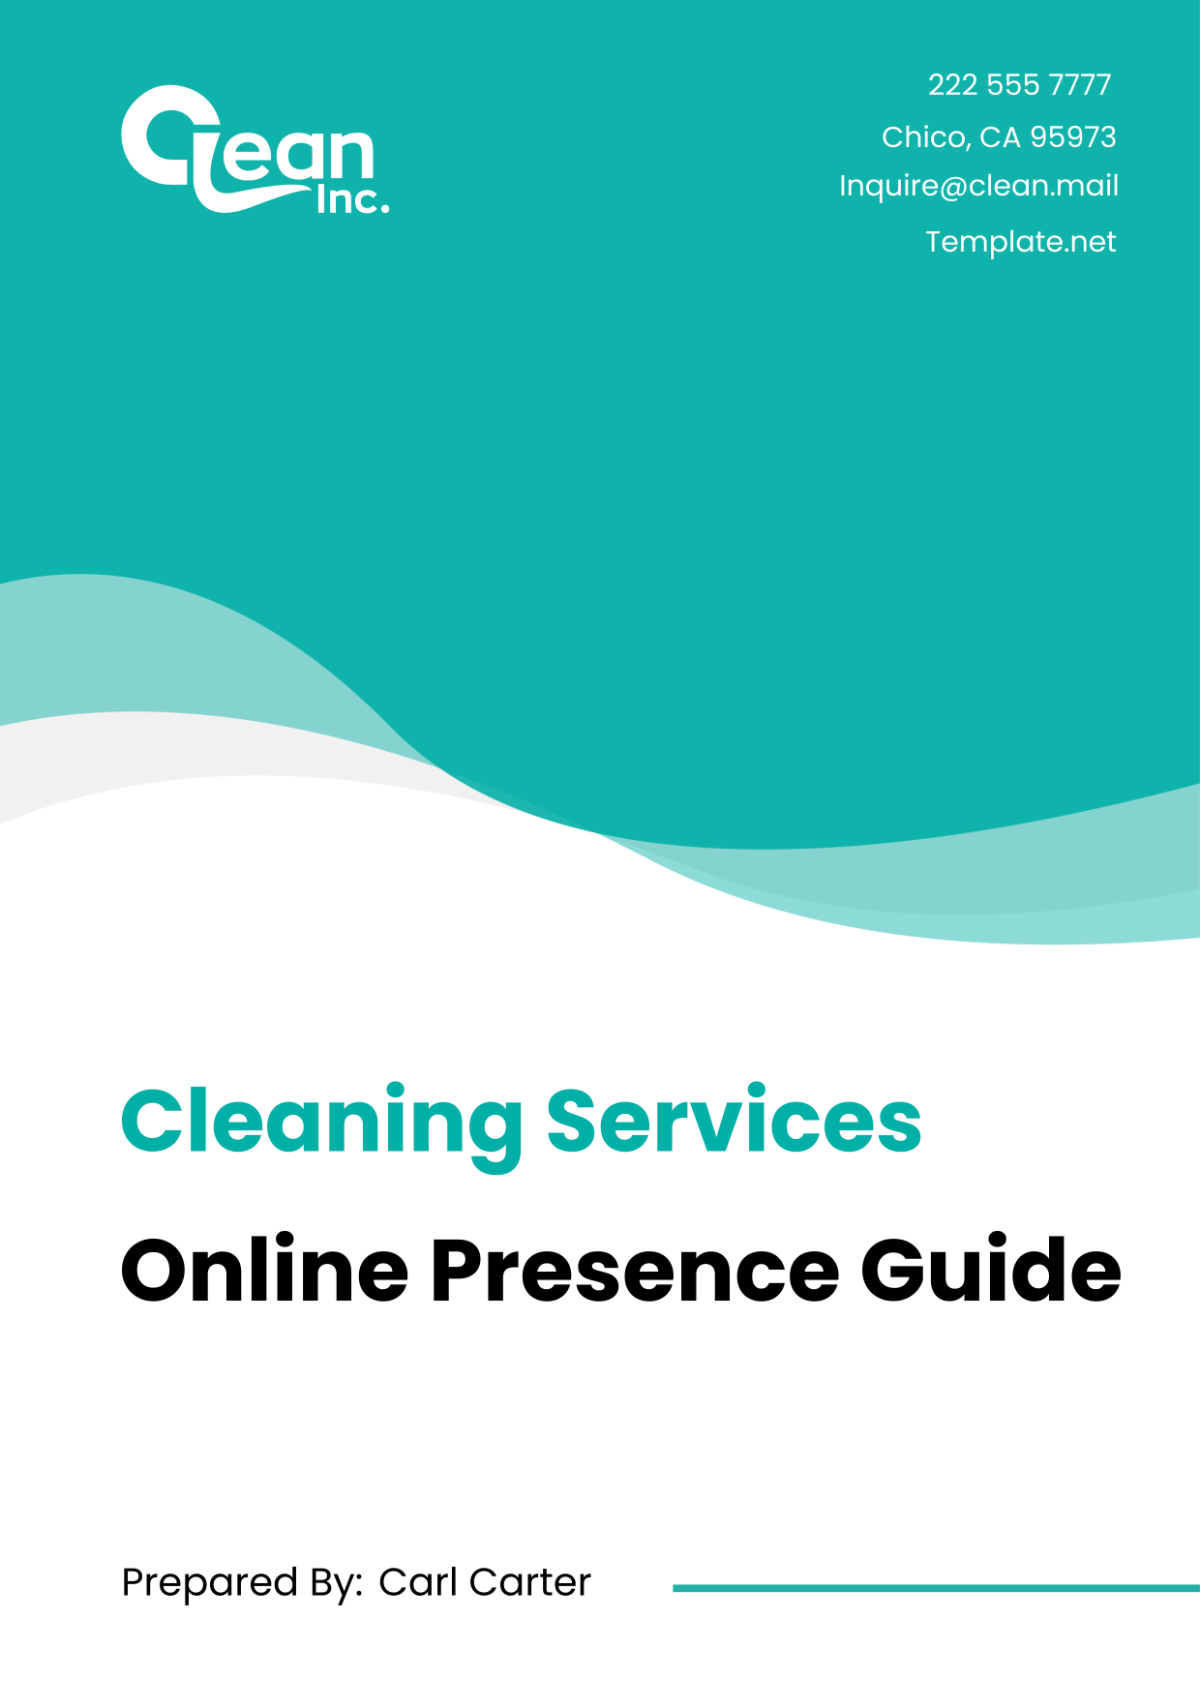 Cleaning Services Online Presence Guide Template